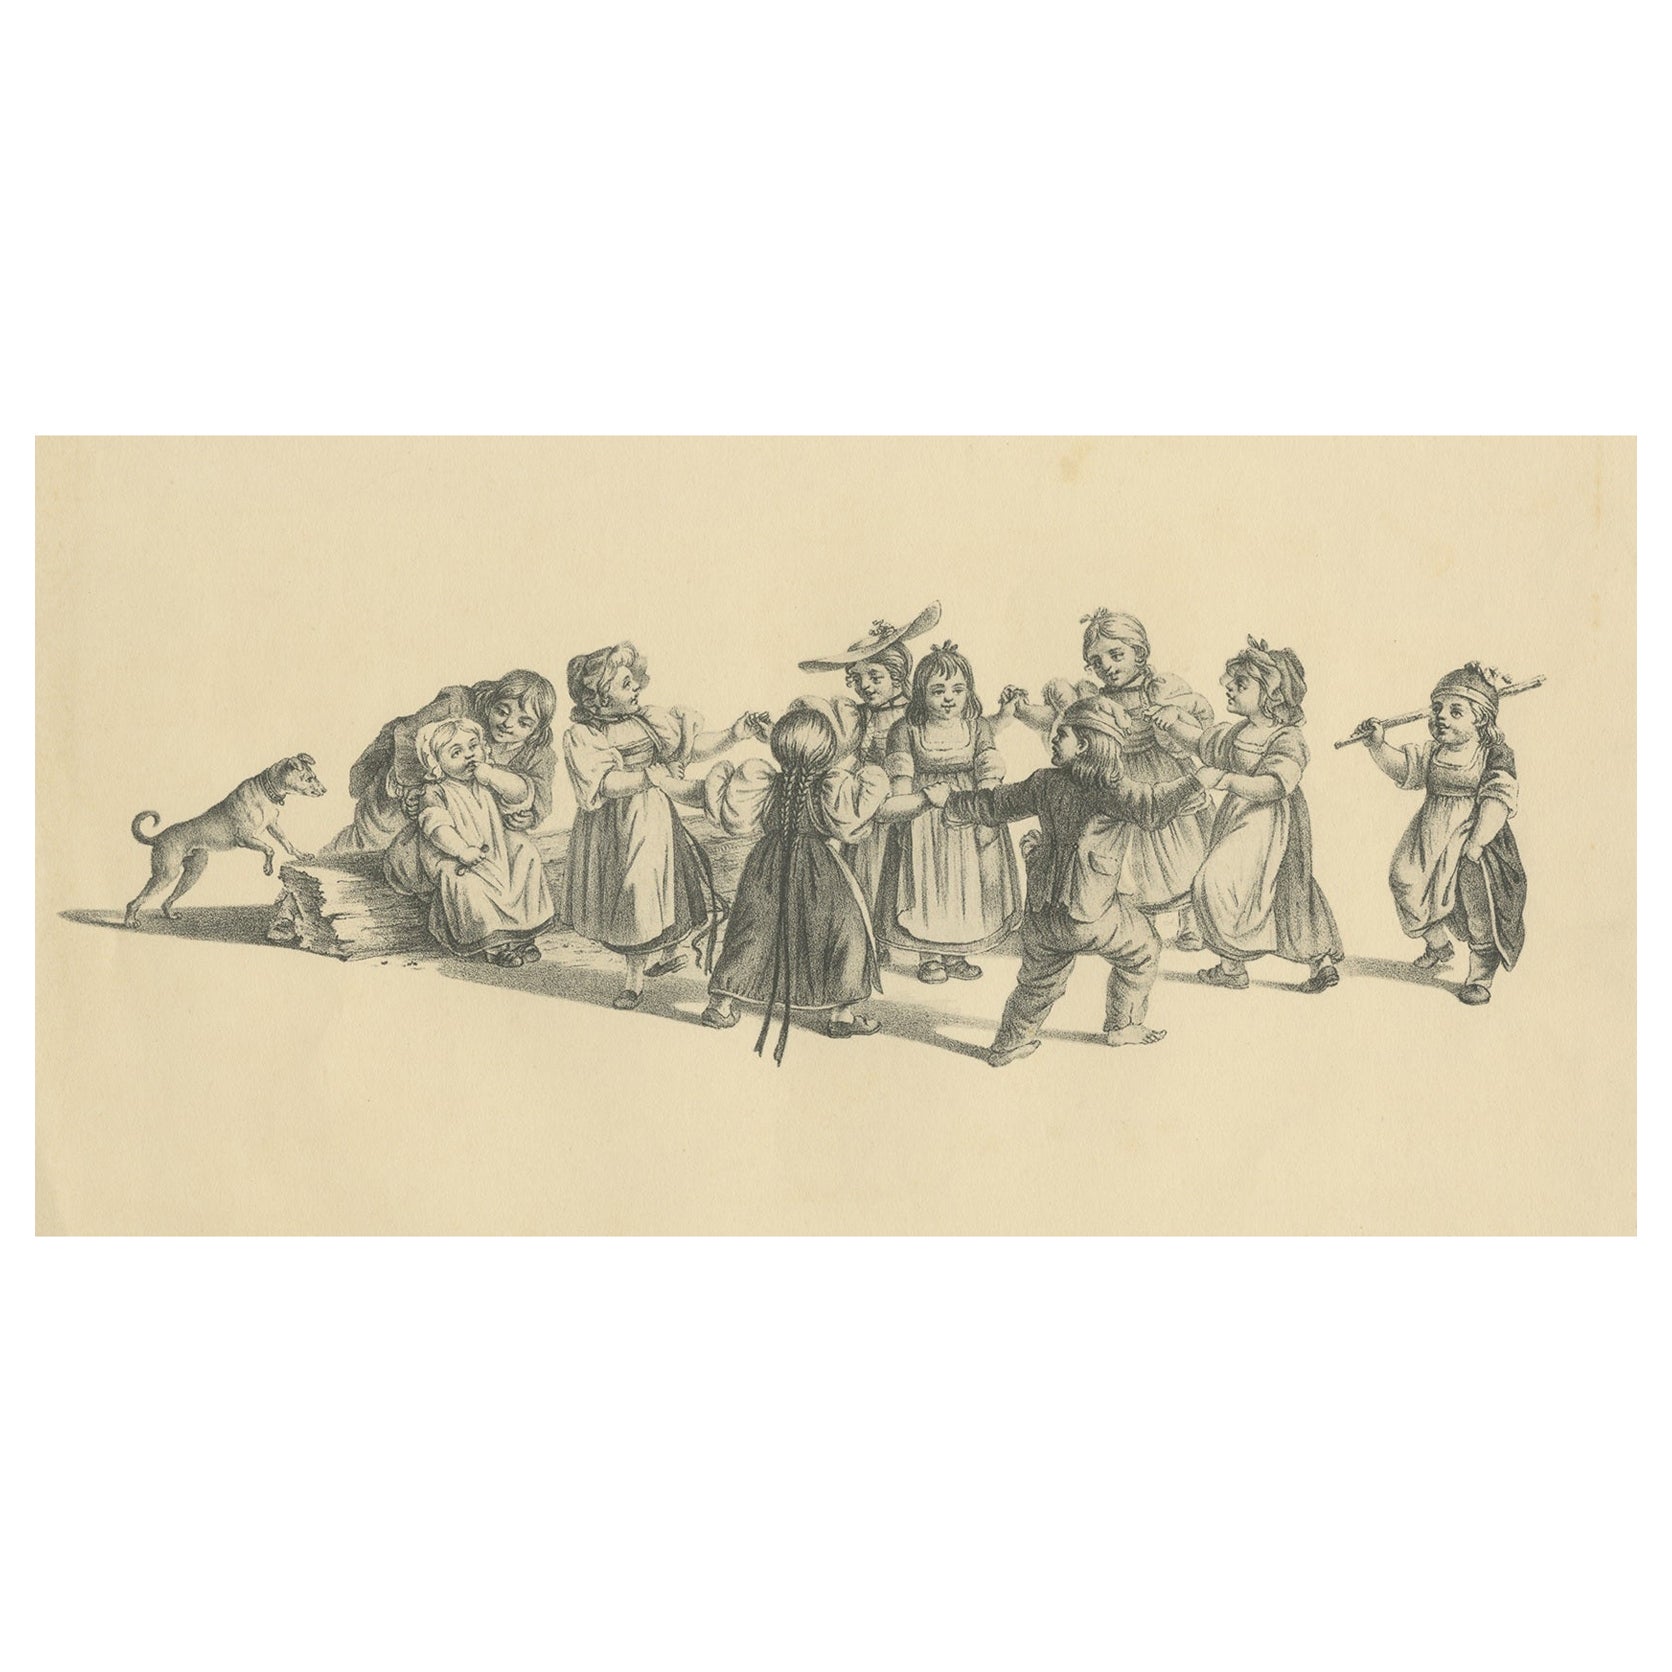 Antique Print of a Group of Children Dancing in a Circle